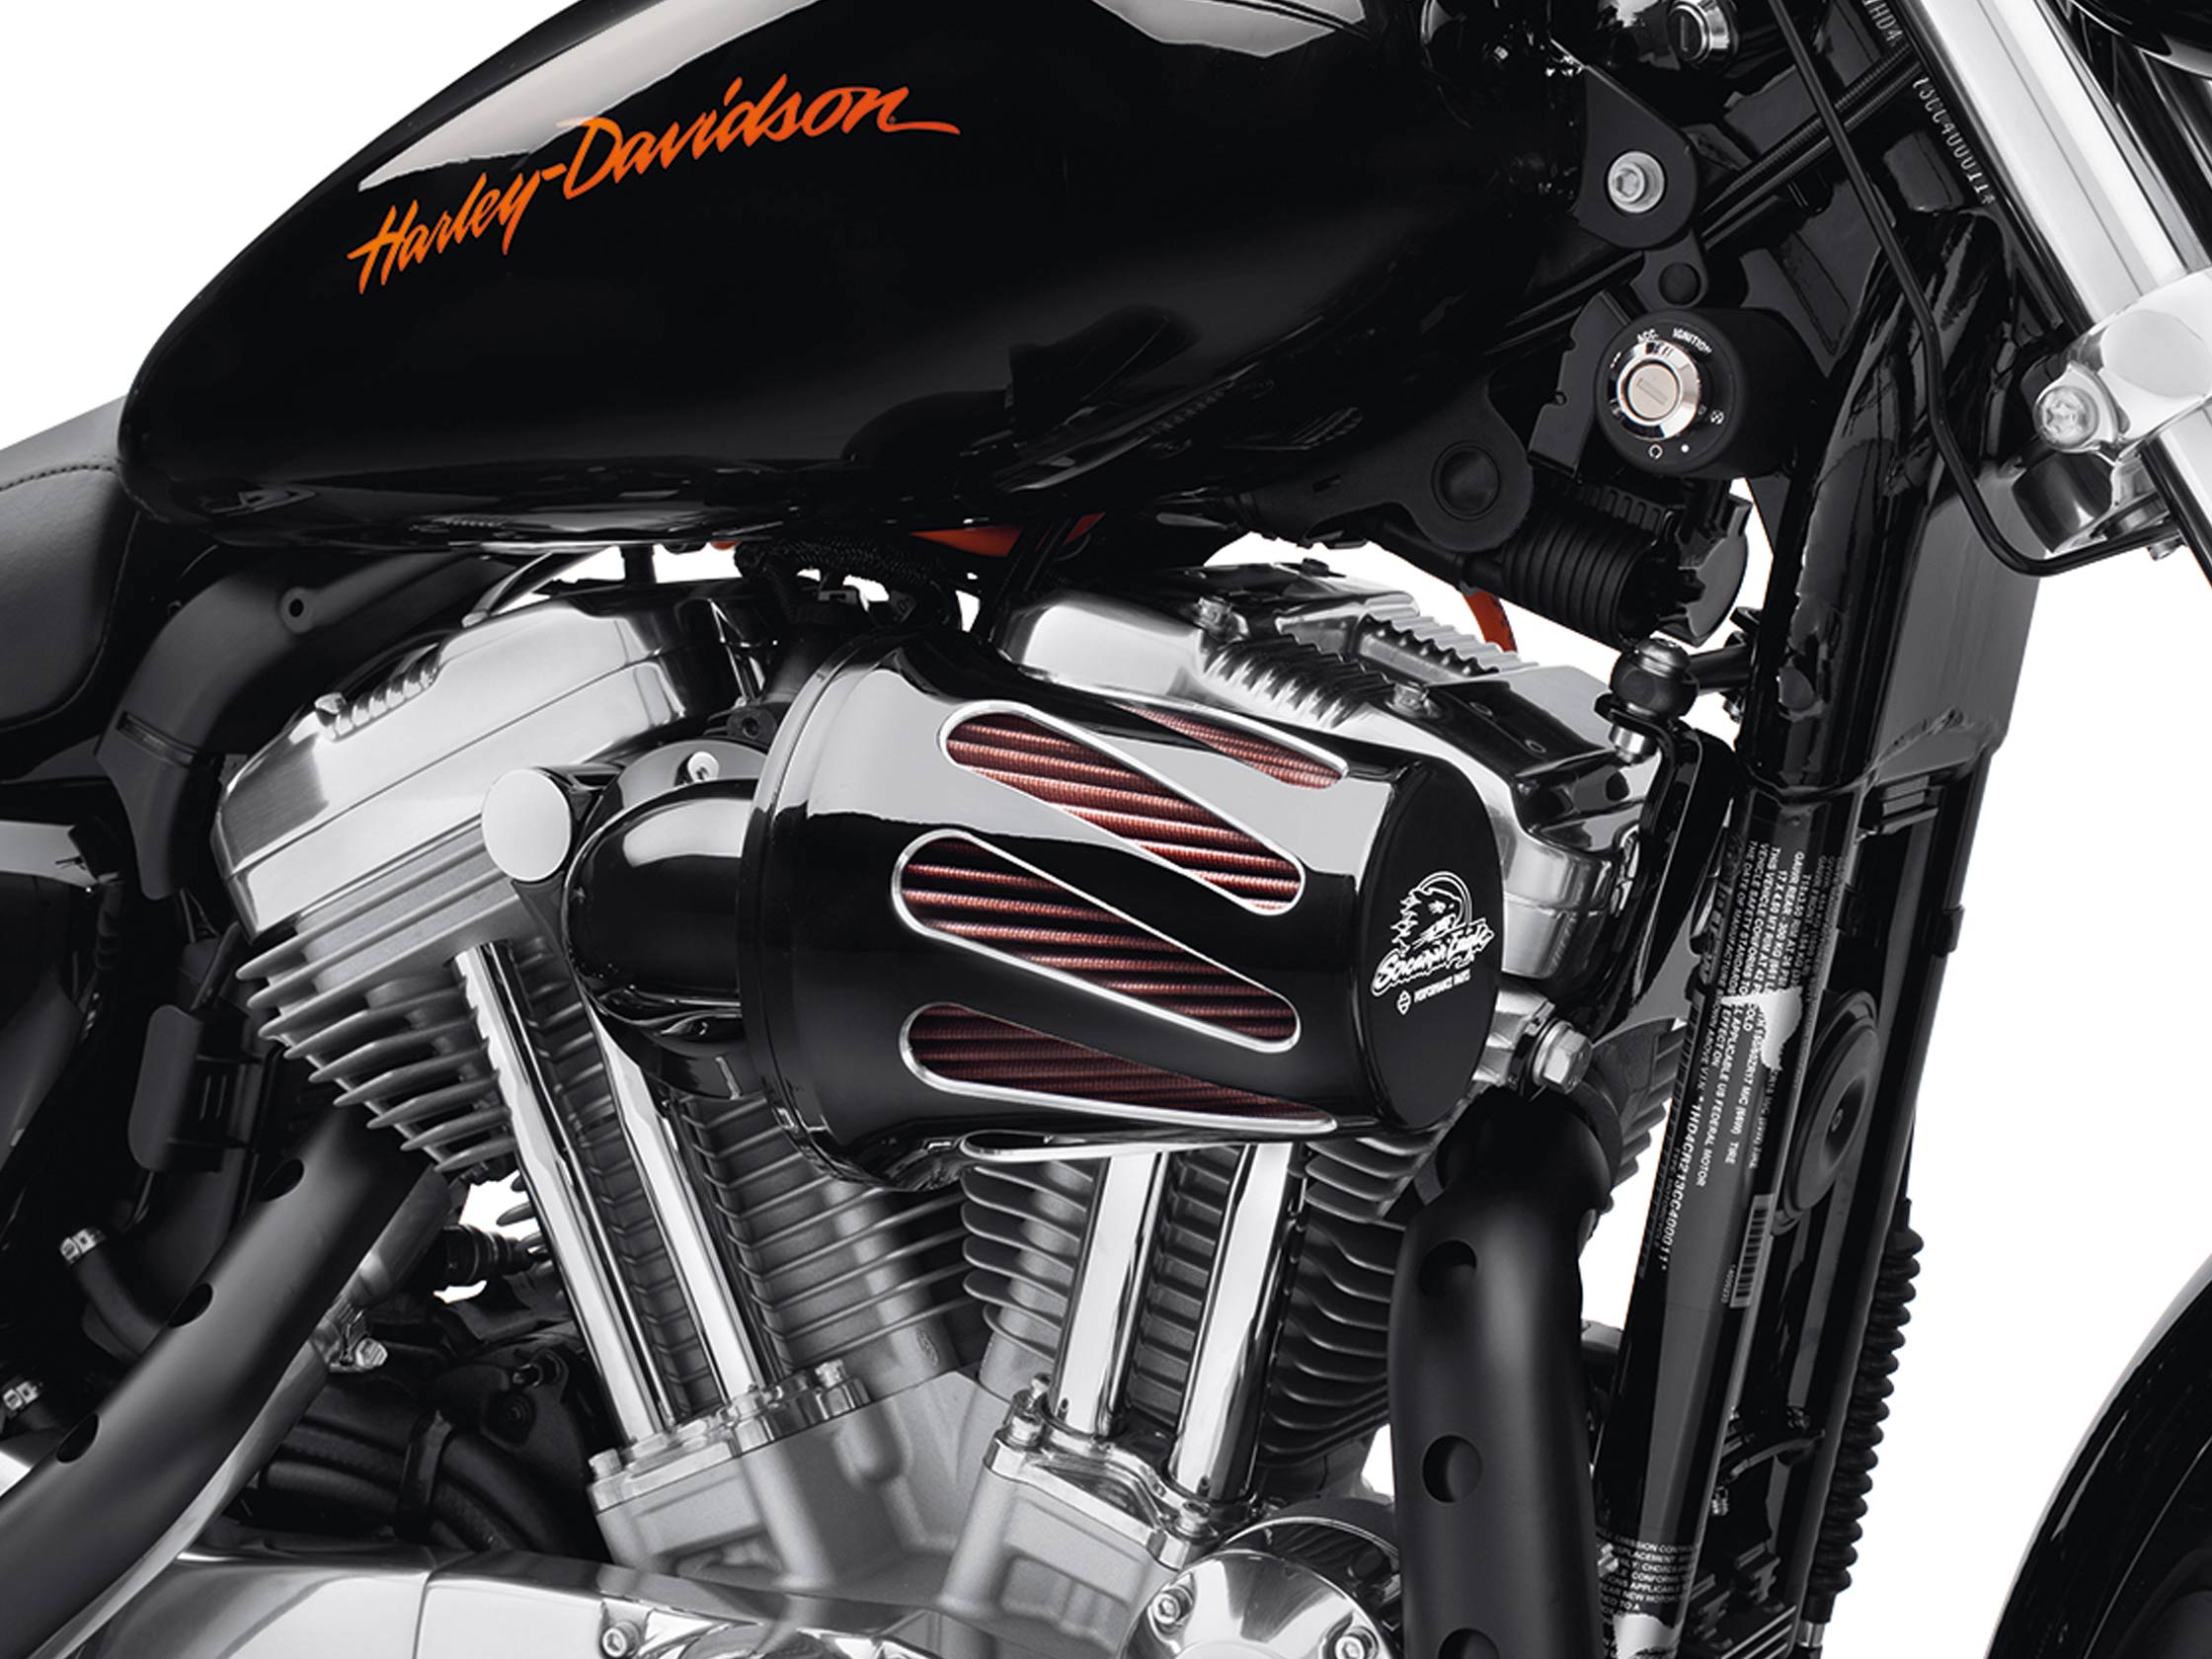 SCREAMIN' EAGLE HEAVY BREATHER<br />FILTER COVER - TWISTED SLOT BLACK  28741-10 / Air Filter Kits / Screamin´ eagle / Parts & Accessories / -  House-of-Flames Harley-Davidson